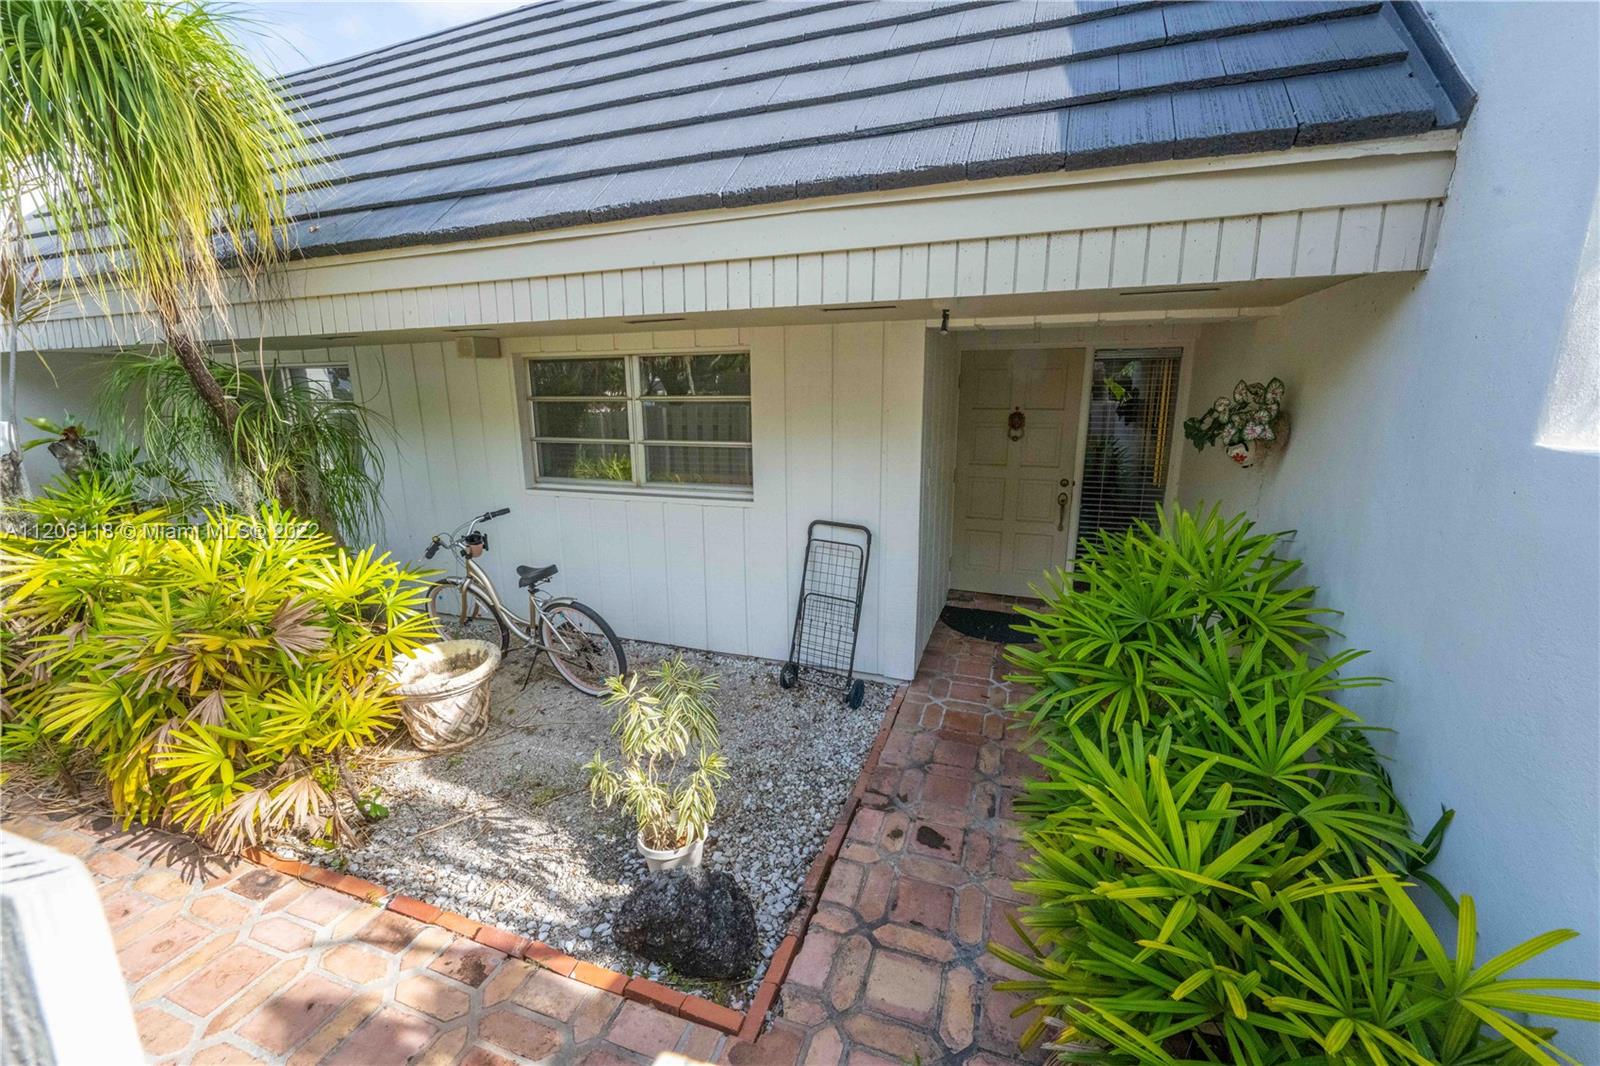 A great opportunity to own in Kings Creek, a highly sought after area in Miami-Dade County! This spacious unit provides 3 ample bedrooms, open concept, large back patio facing the canal and much more!  Amenities include: club house, children's play area, security, pool, billiards, tennis courts, basketball court, racquetball court and walking trails. 2 assigned parking spaces in front of unit. Centrally located, close to Baptist Hospital, Downtown Dadeland, Dadeland Mall, restaurants, Metrorail and expressways. A must see! This is the exact definition of a hard to come by opportunity ready for your personal touch!  As per tax roll, unit has 1,514 Sq Ft of living space on a 3,900 Sq Ft lot.